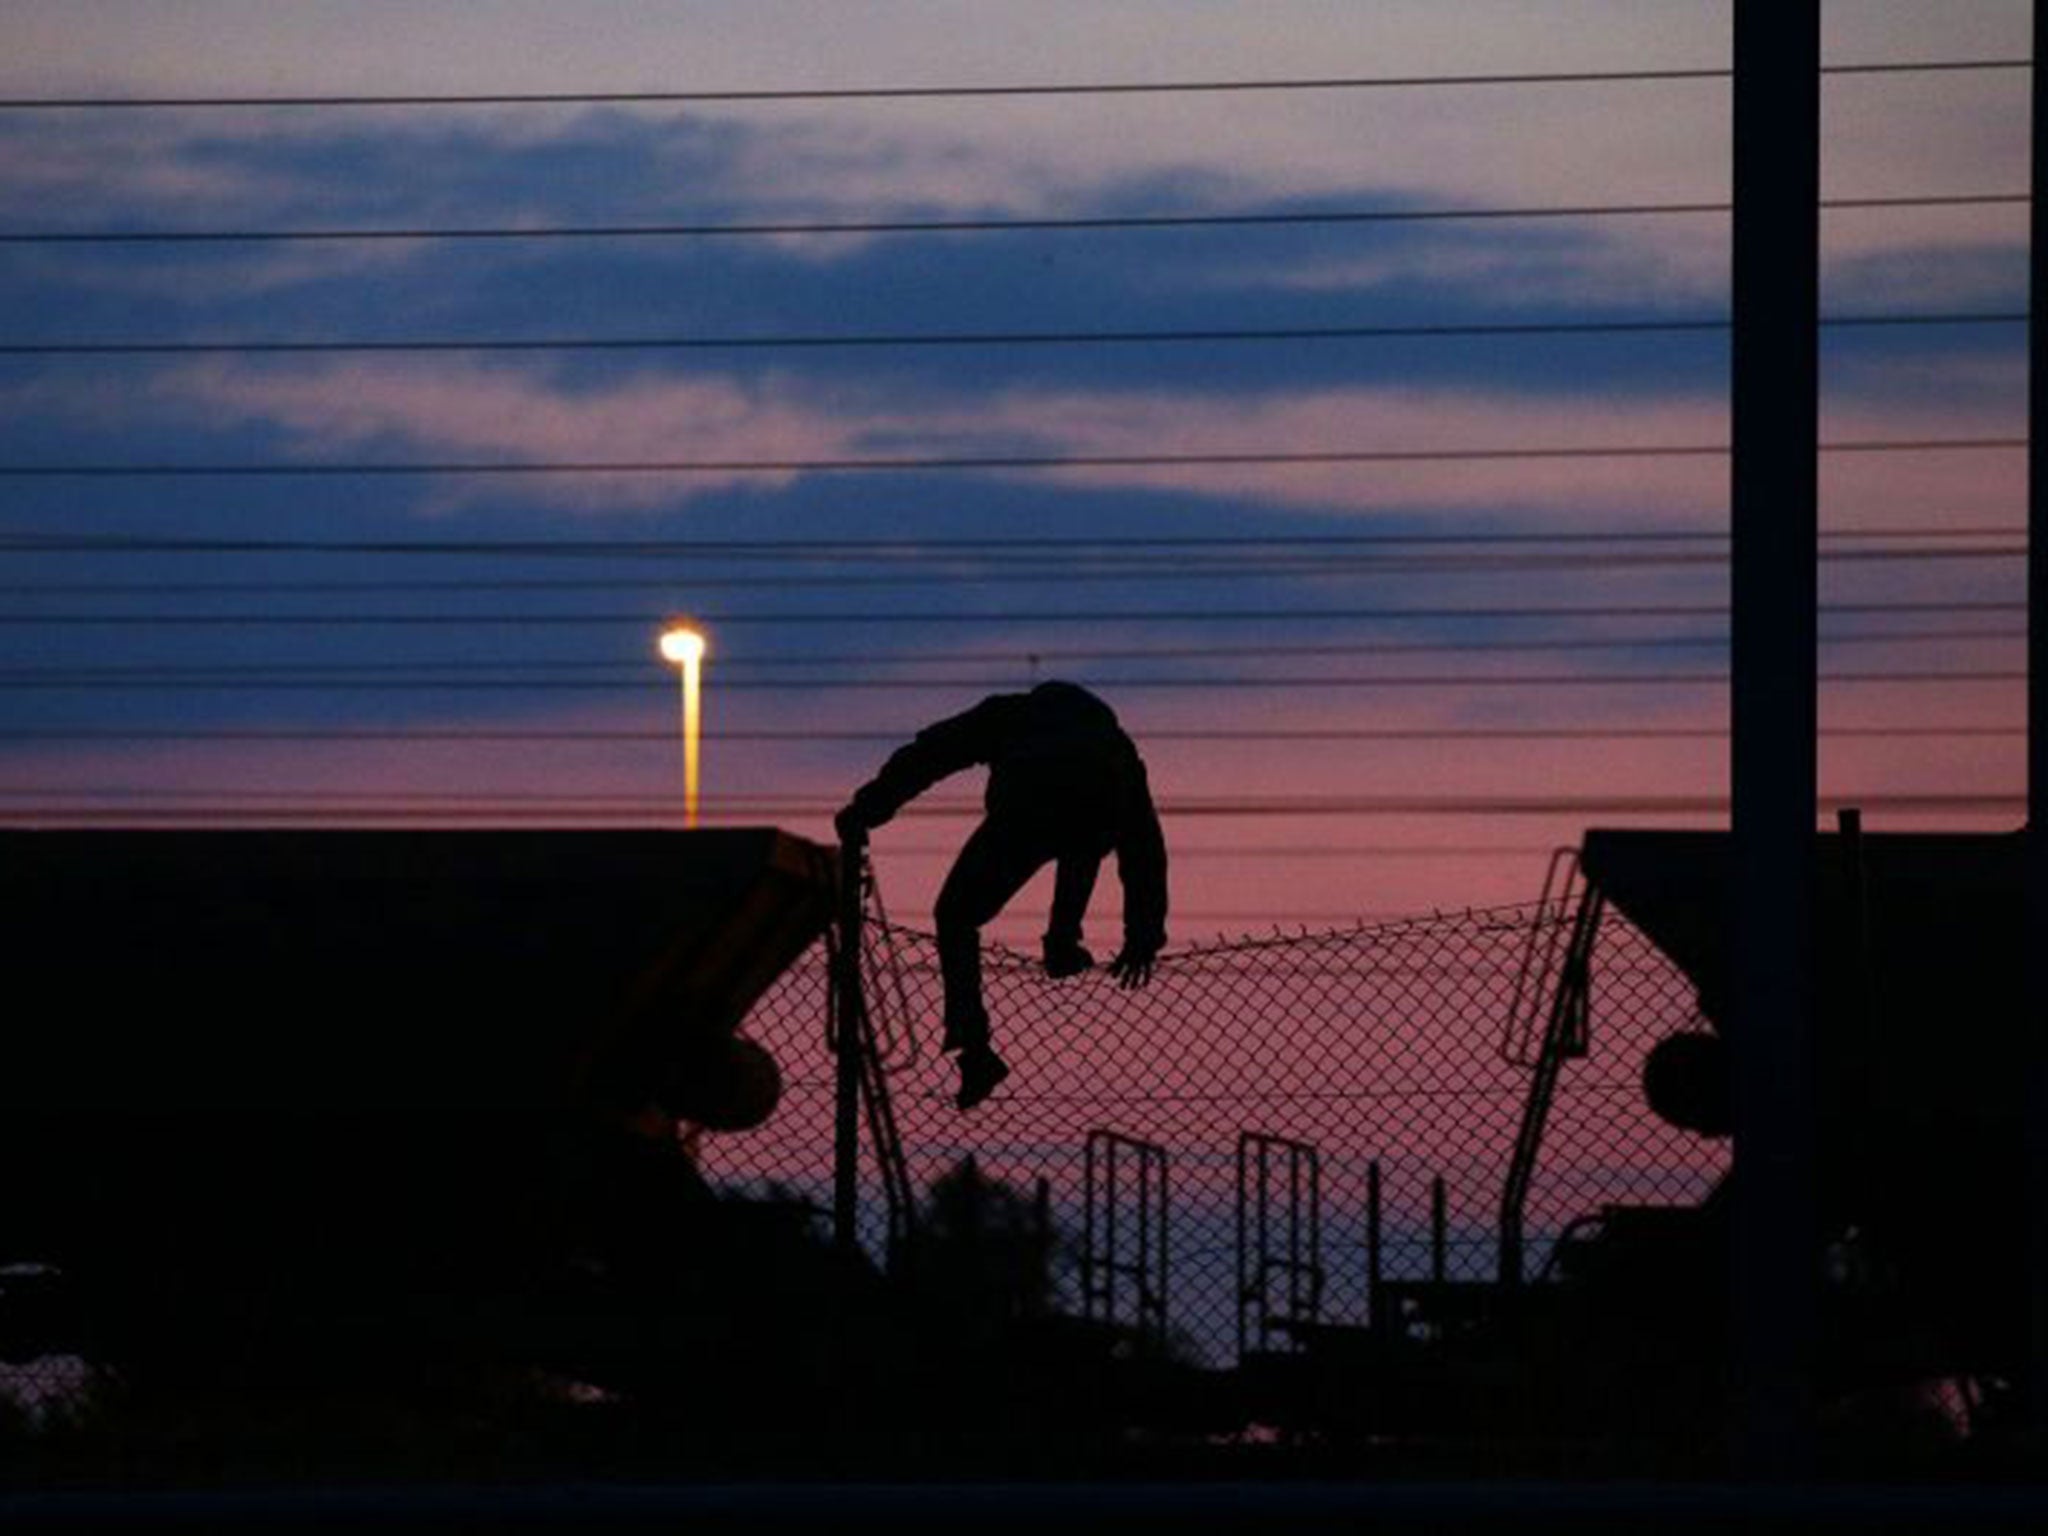 A migrant climbs over a fence on to the tracks near the Eurotunnel site at Coquelles in Calais, France